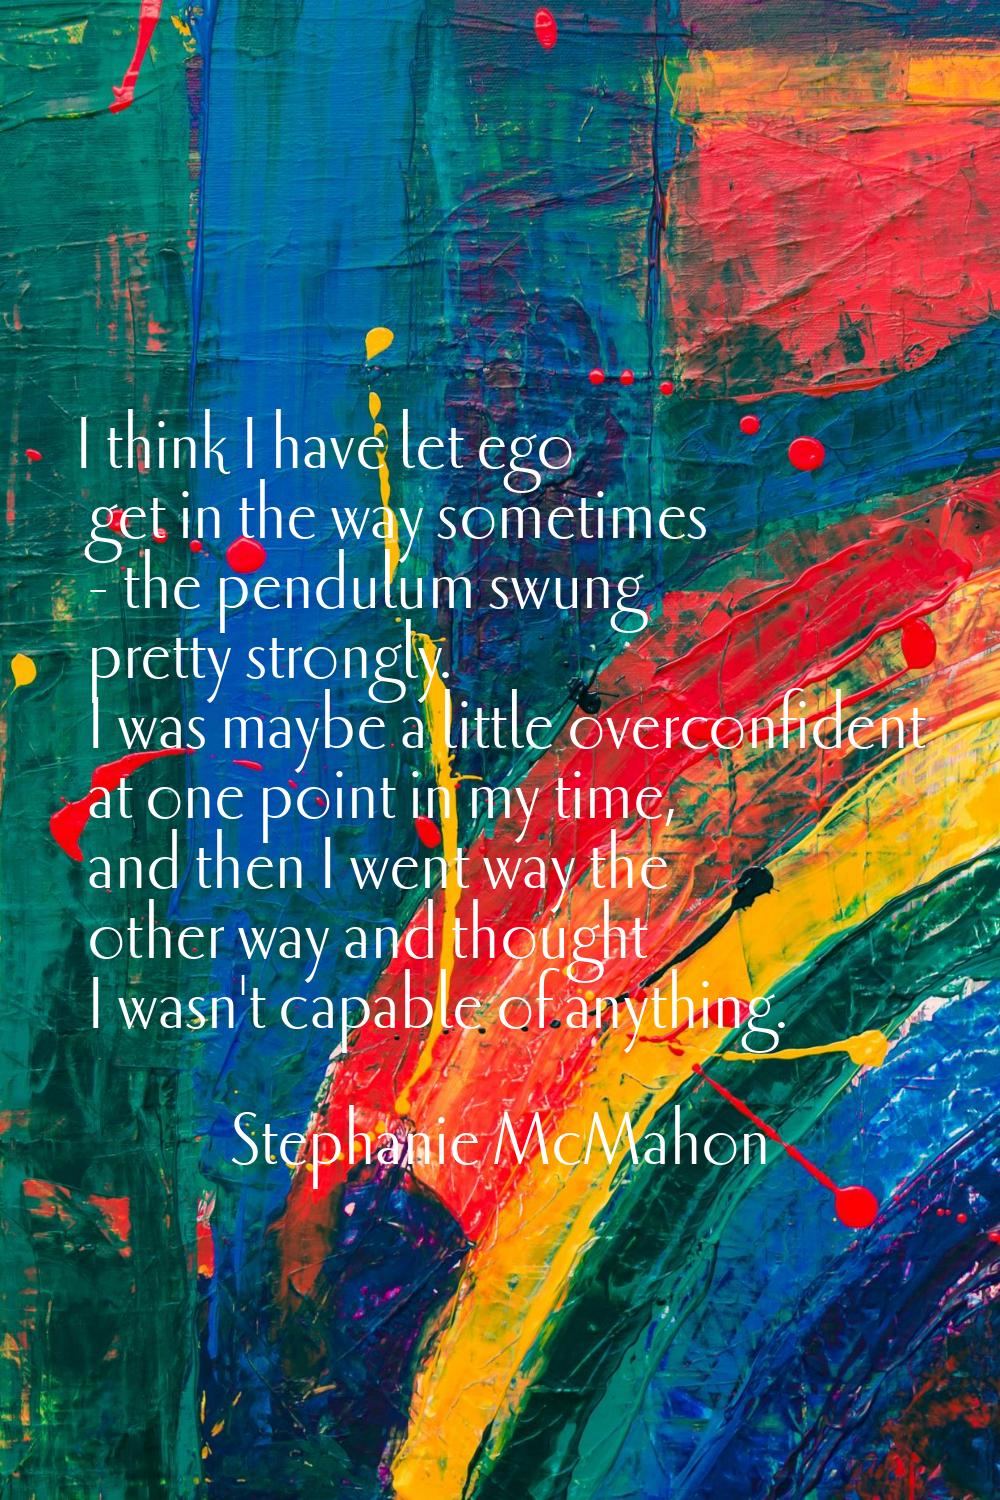 I think I have let ego get in the way sometimes - the pendulum swung pretty strongly. I was maybe a